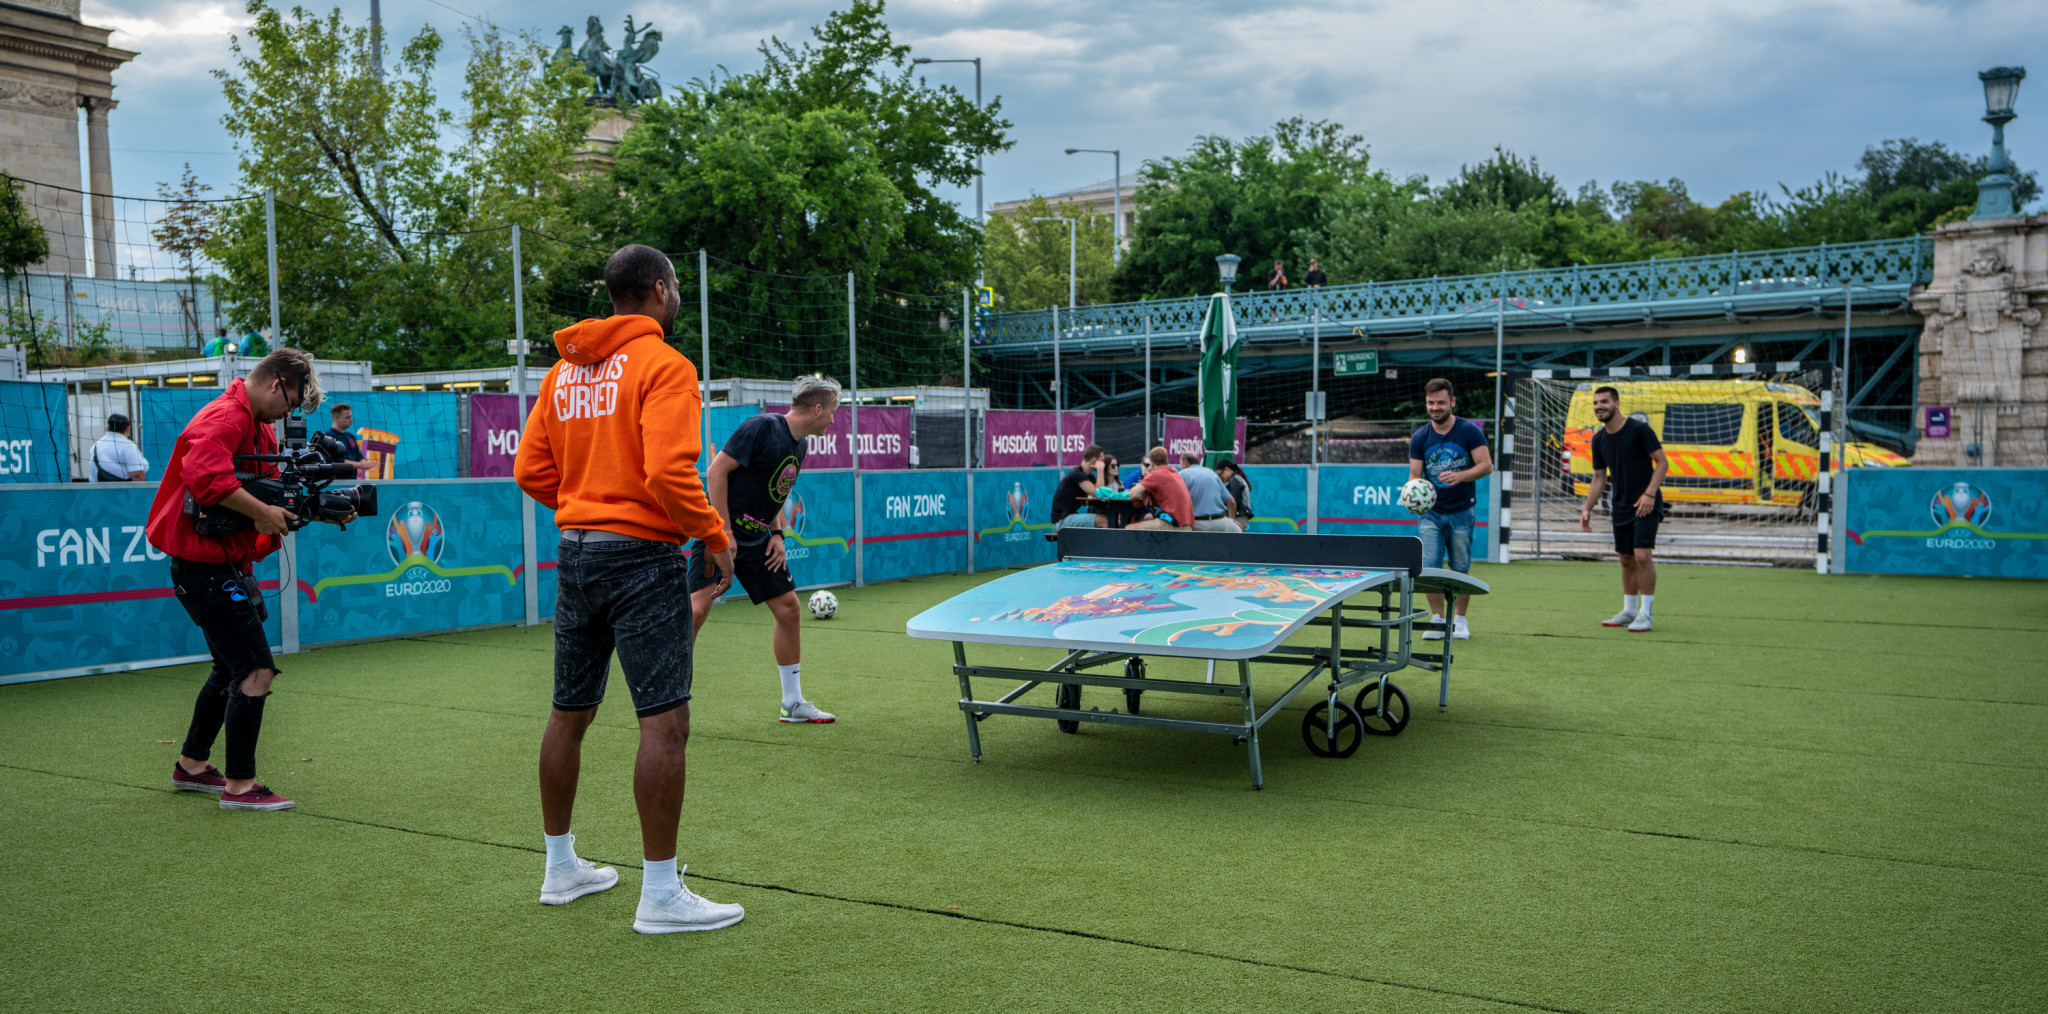 The 12-hour teqball match took place at the UEFA Festival Fan Zone in Budapest, finishing just before kickoff in the UEFA Euro 2020 final ©FITEQ